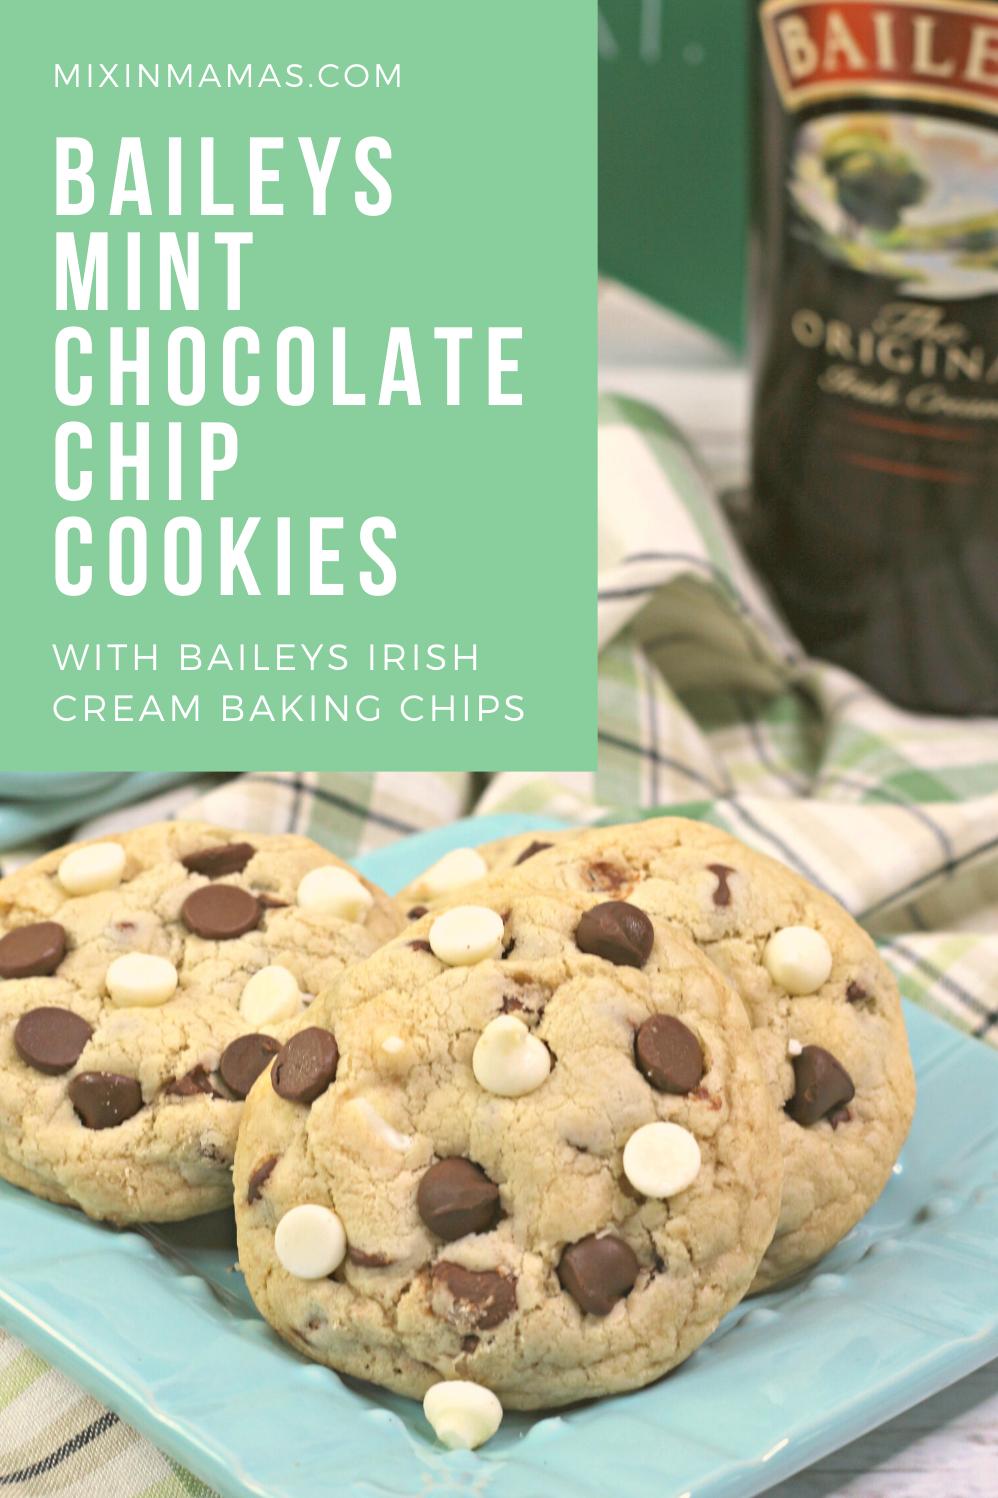  The combination of mint and Irish cream flavors is absolutely addictive in these cookies.